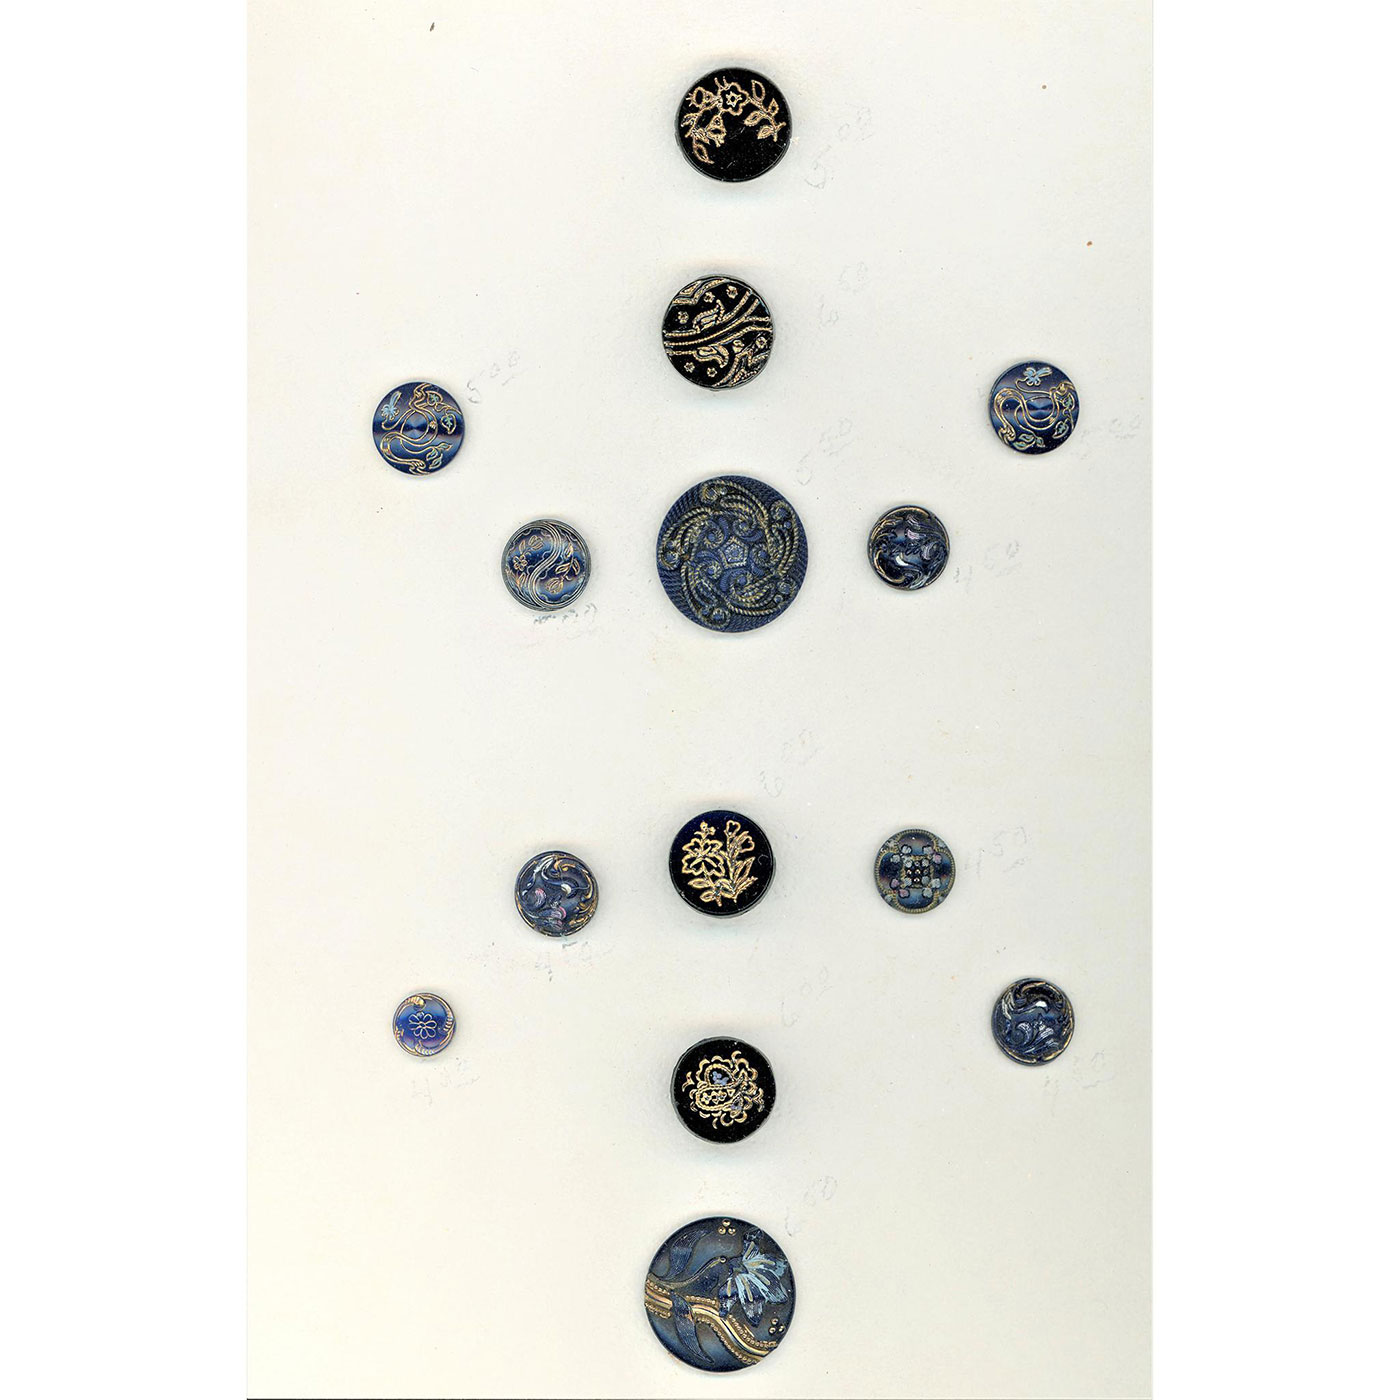 3 SMALL CARDS OF DIVISION ONE ASSORTED MATERIAL BUTTONS - Image 6 of 6